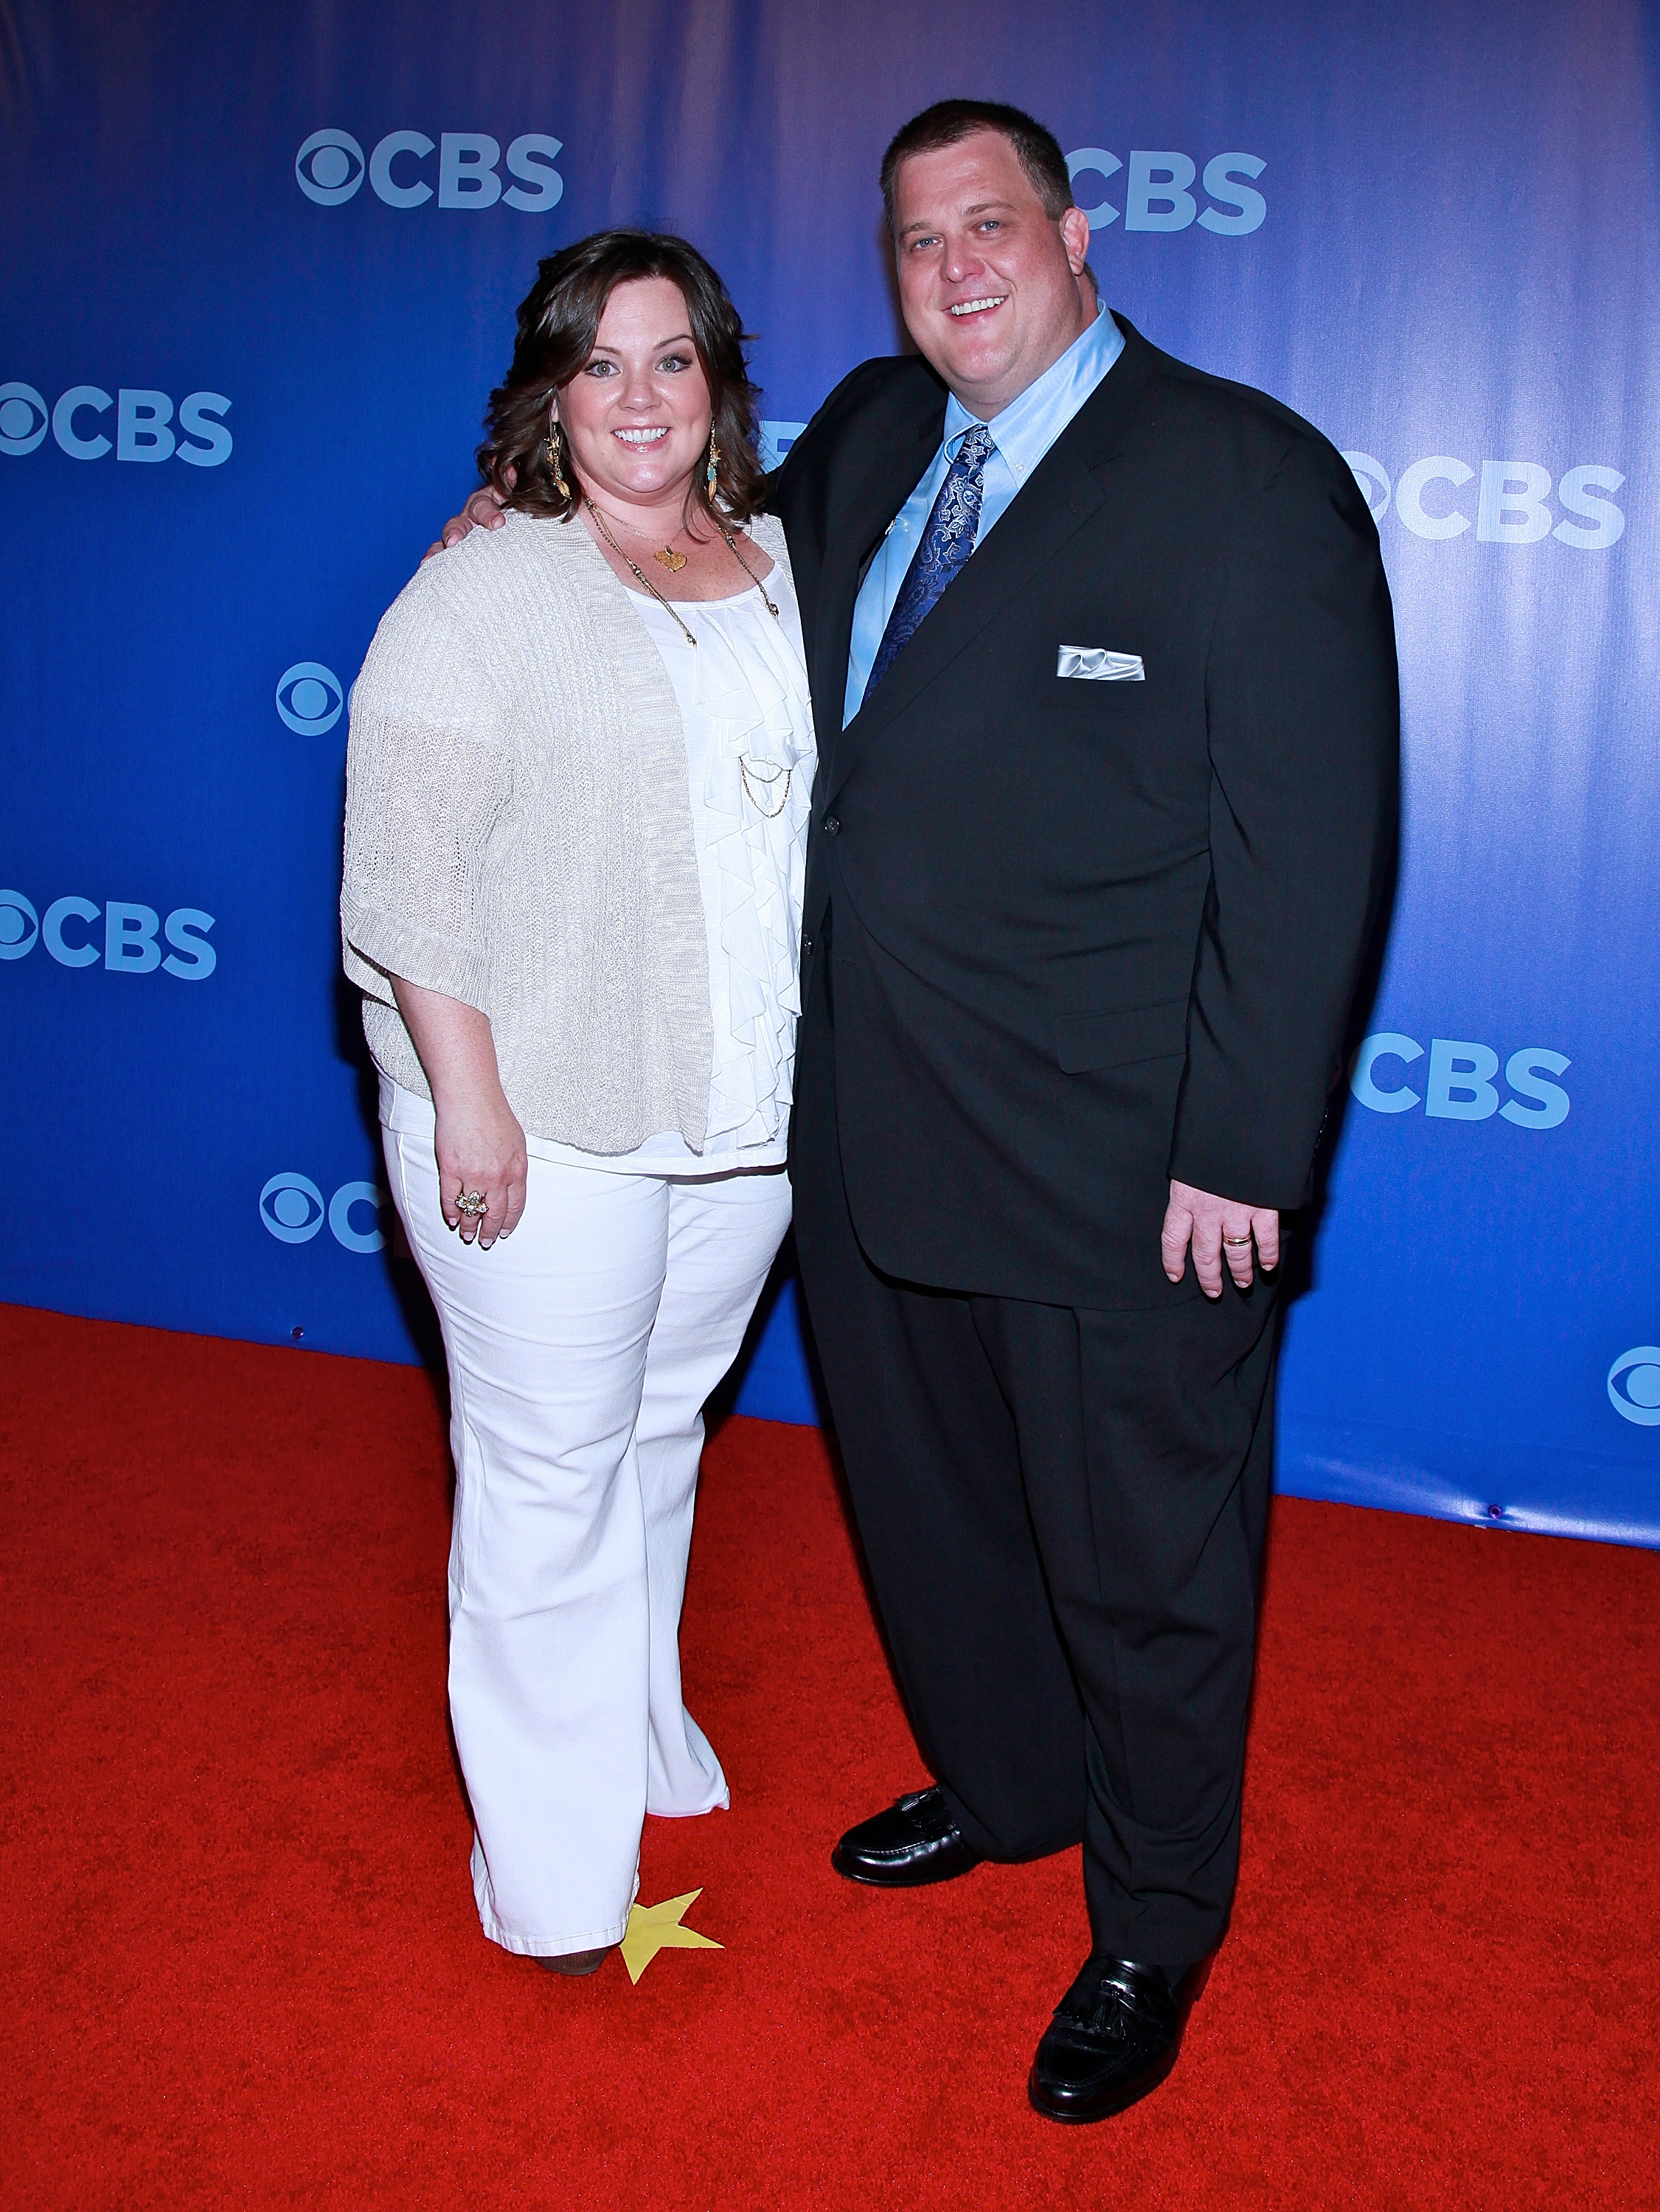 Billy Gardell s Weight Loss Transformation Photos Then and Now